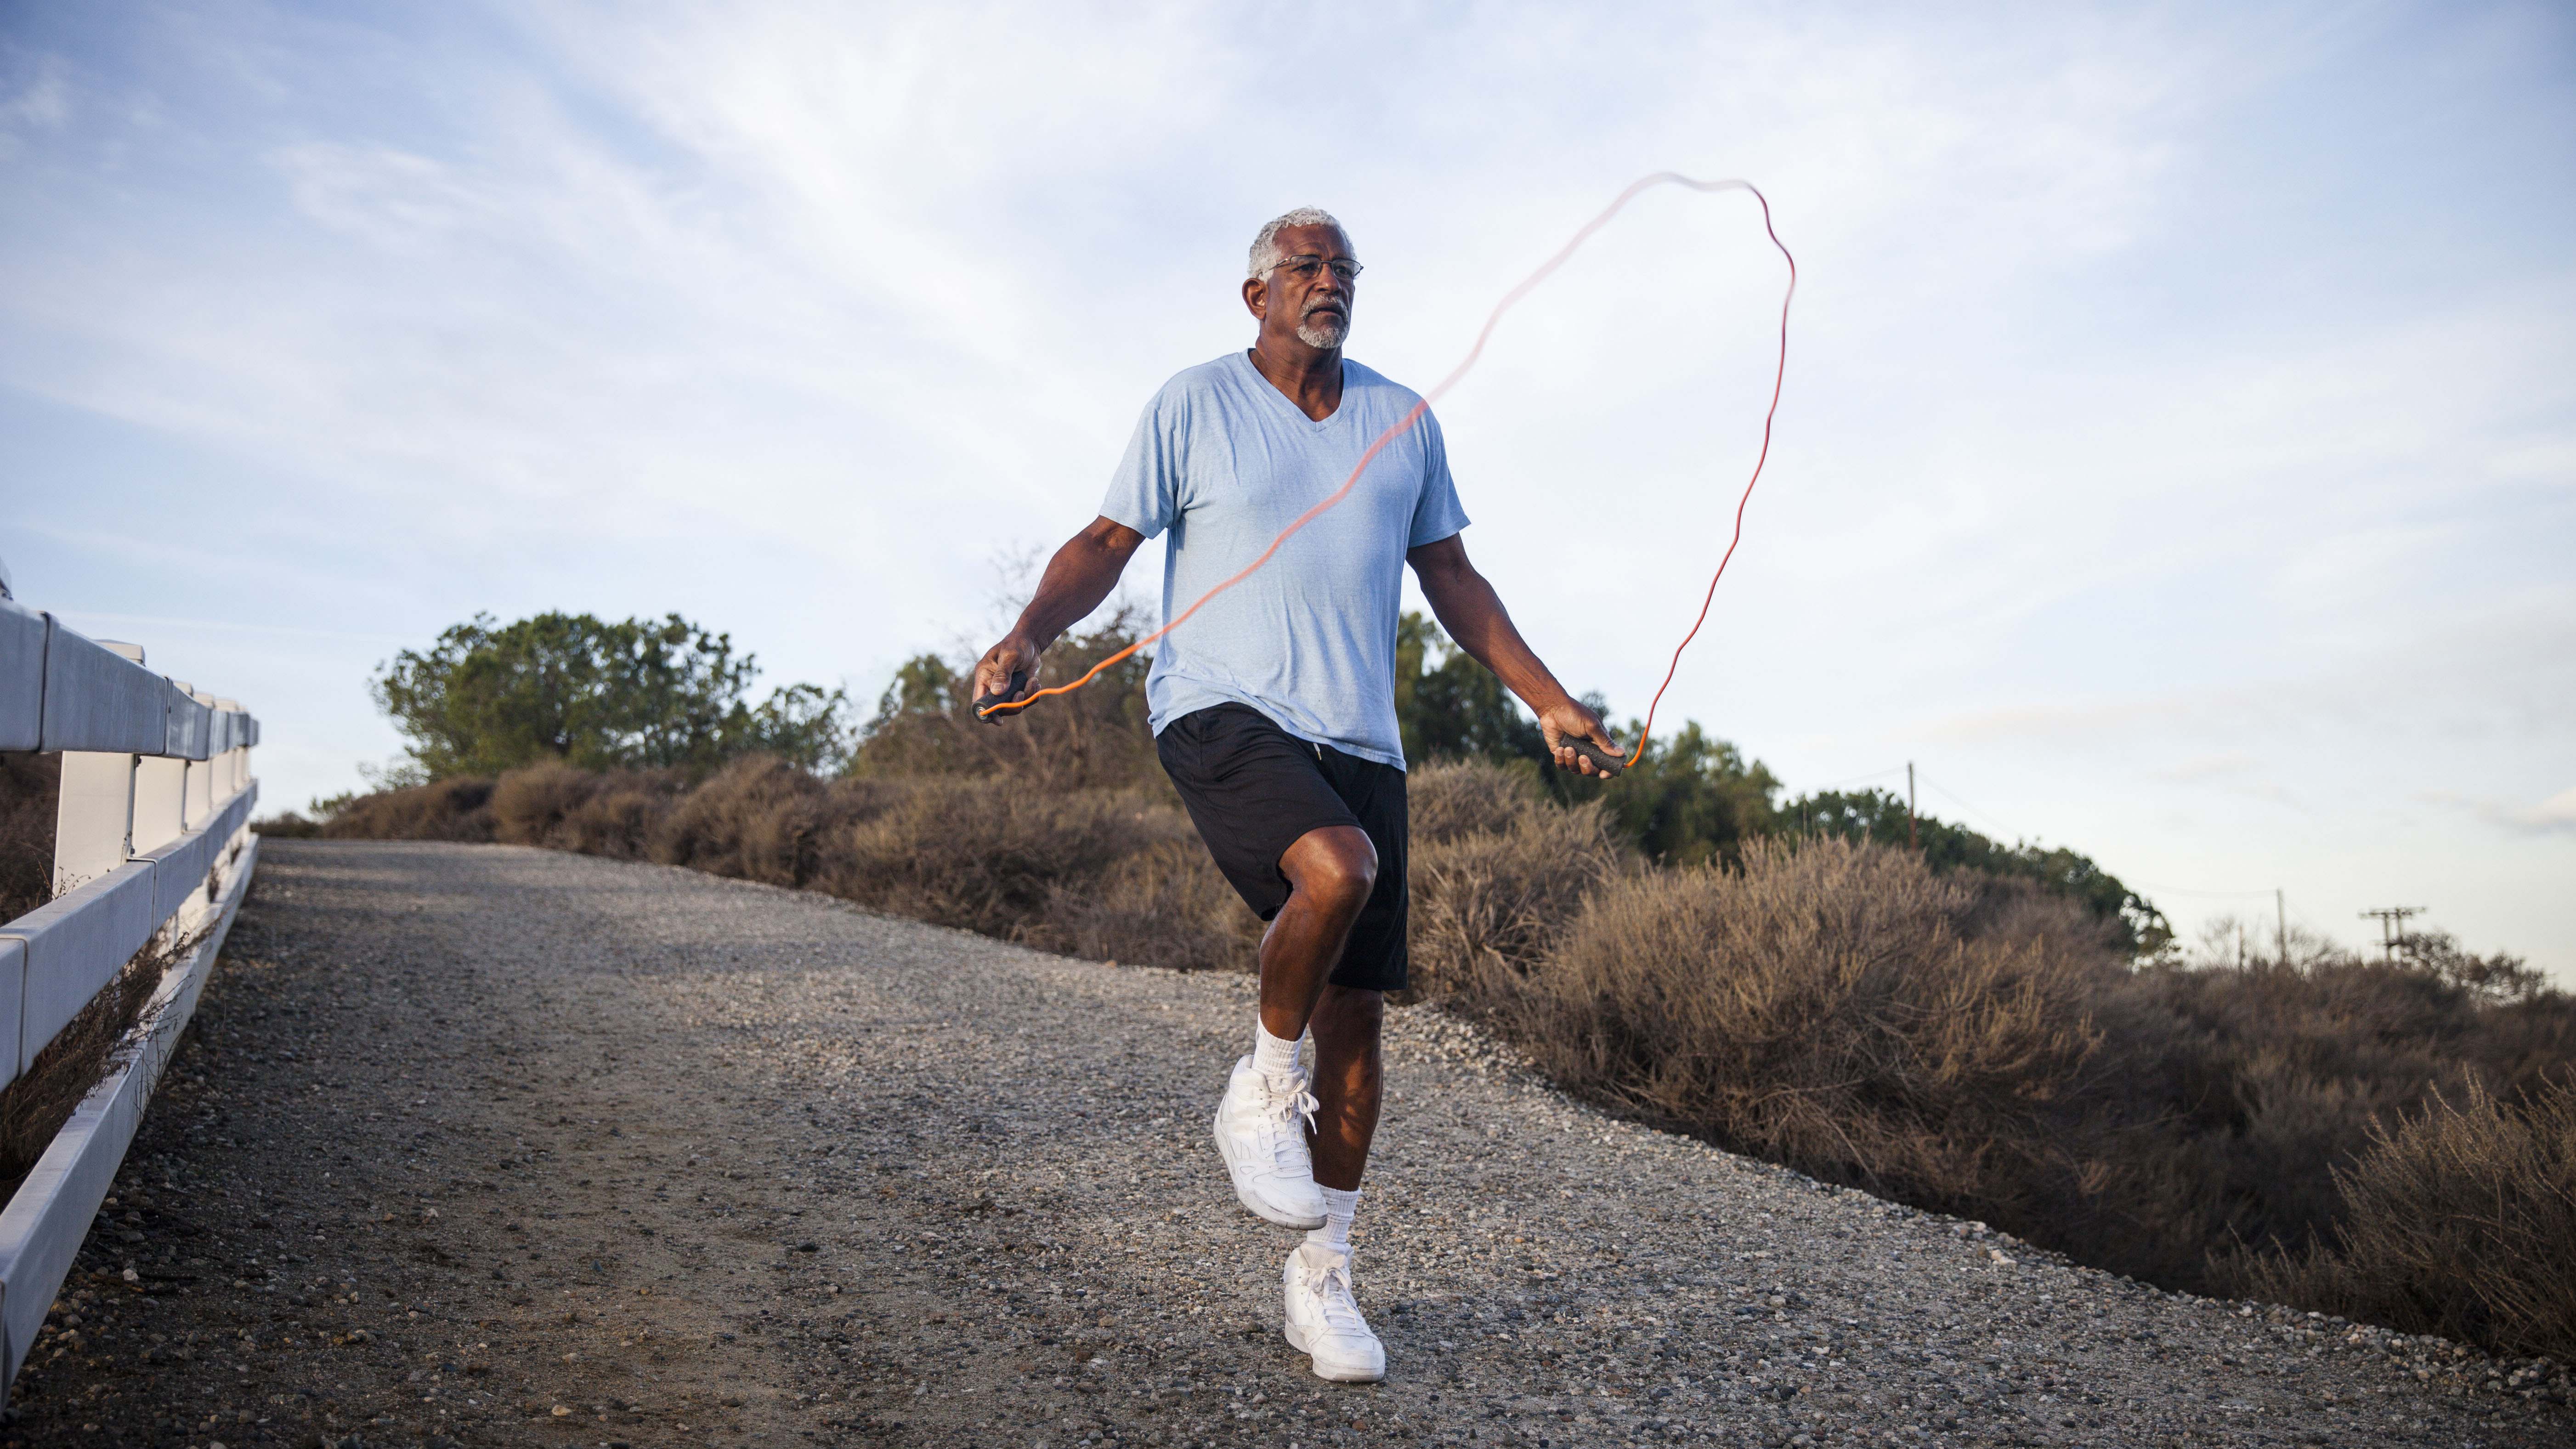 Man skipping rope as cross training exercise outdoors